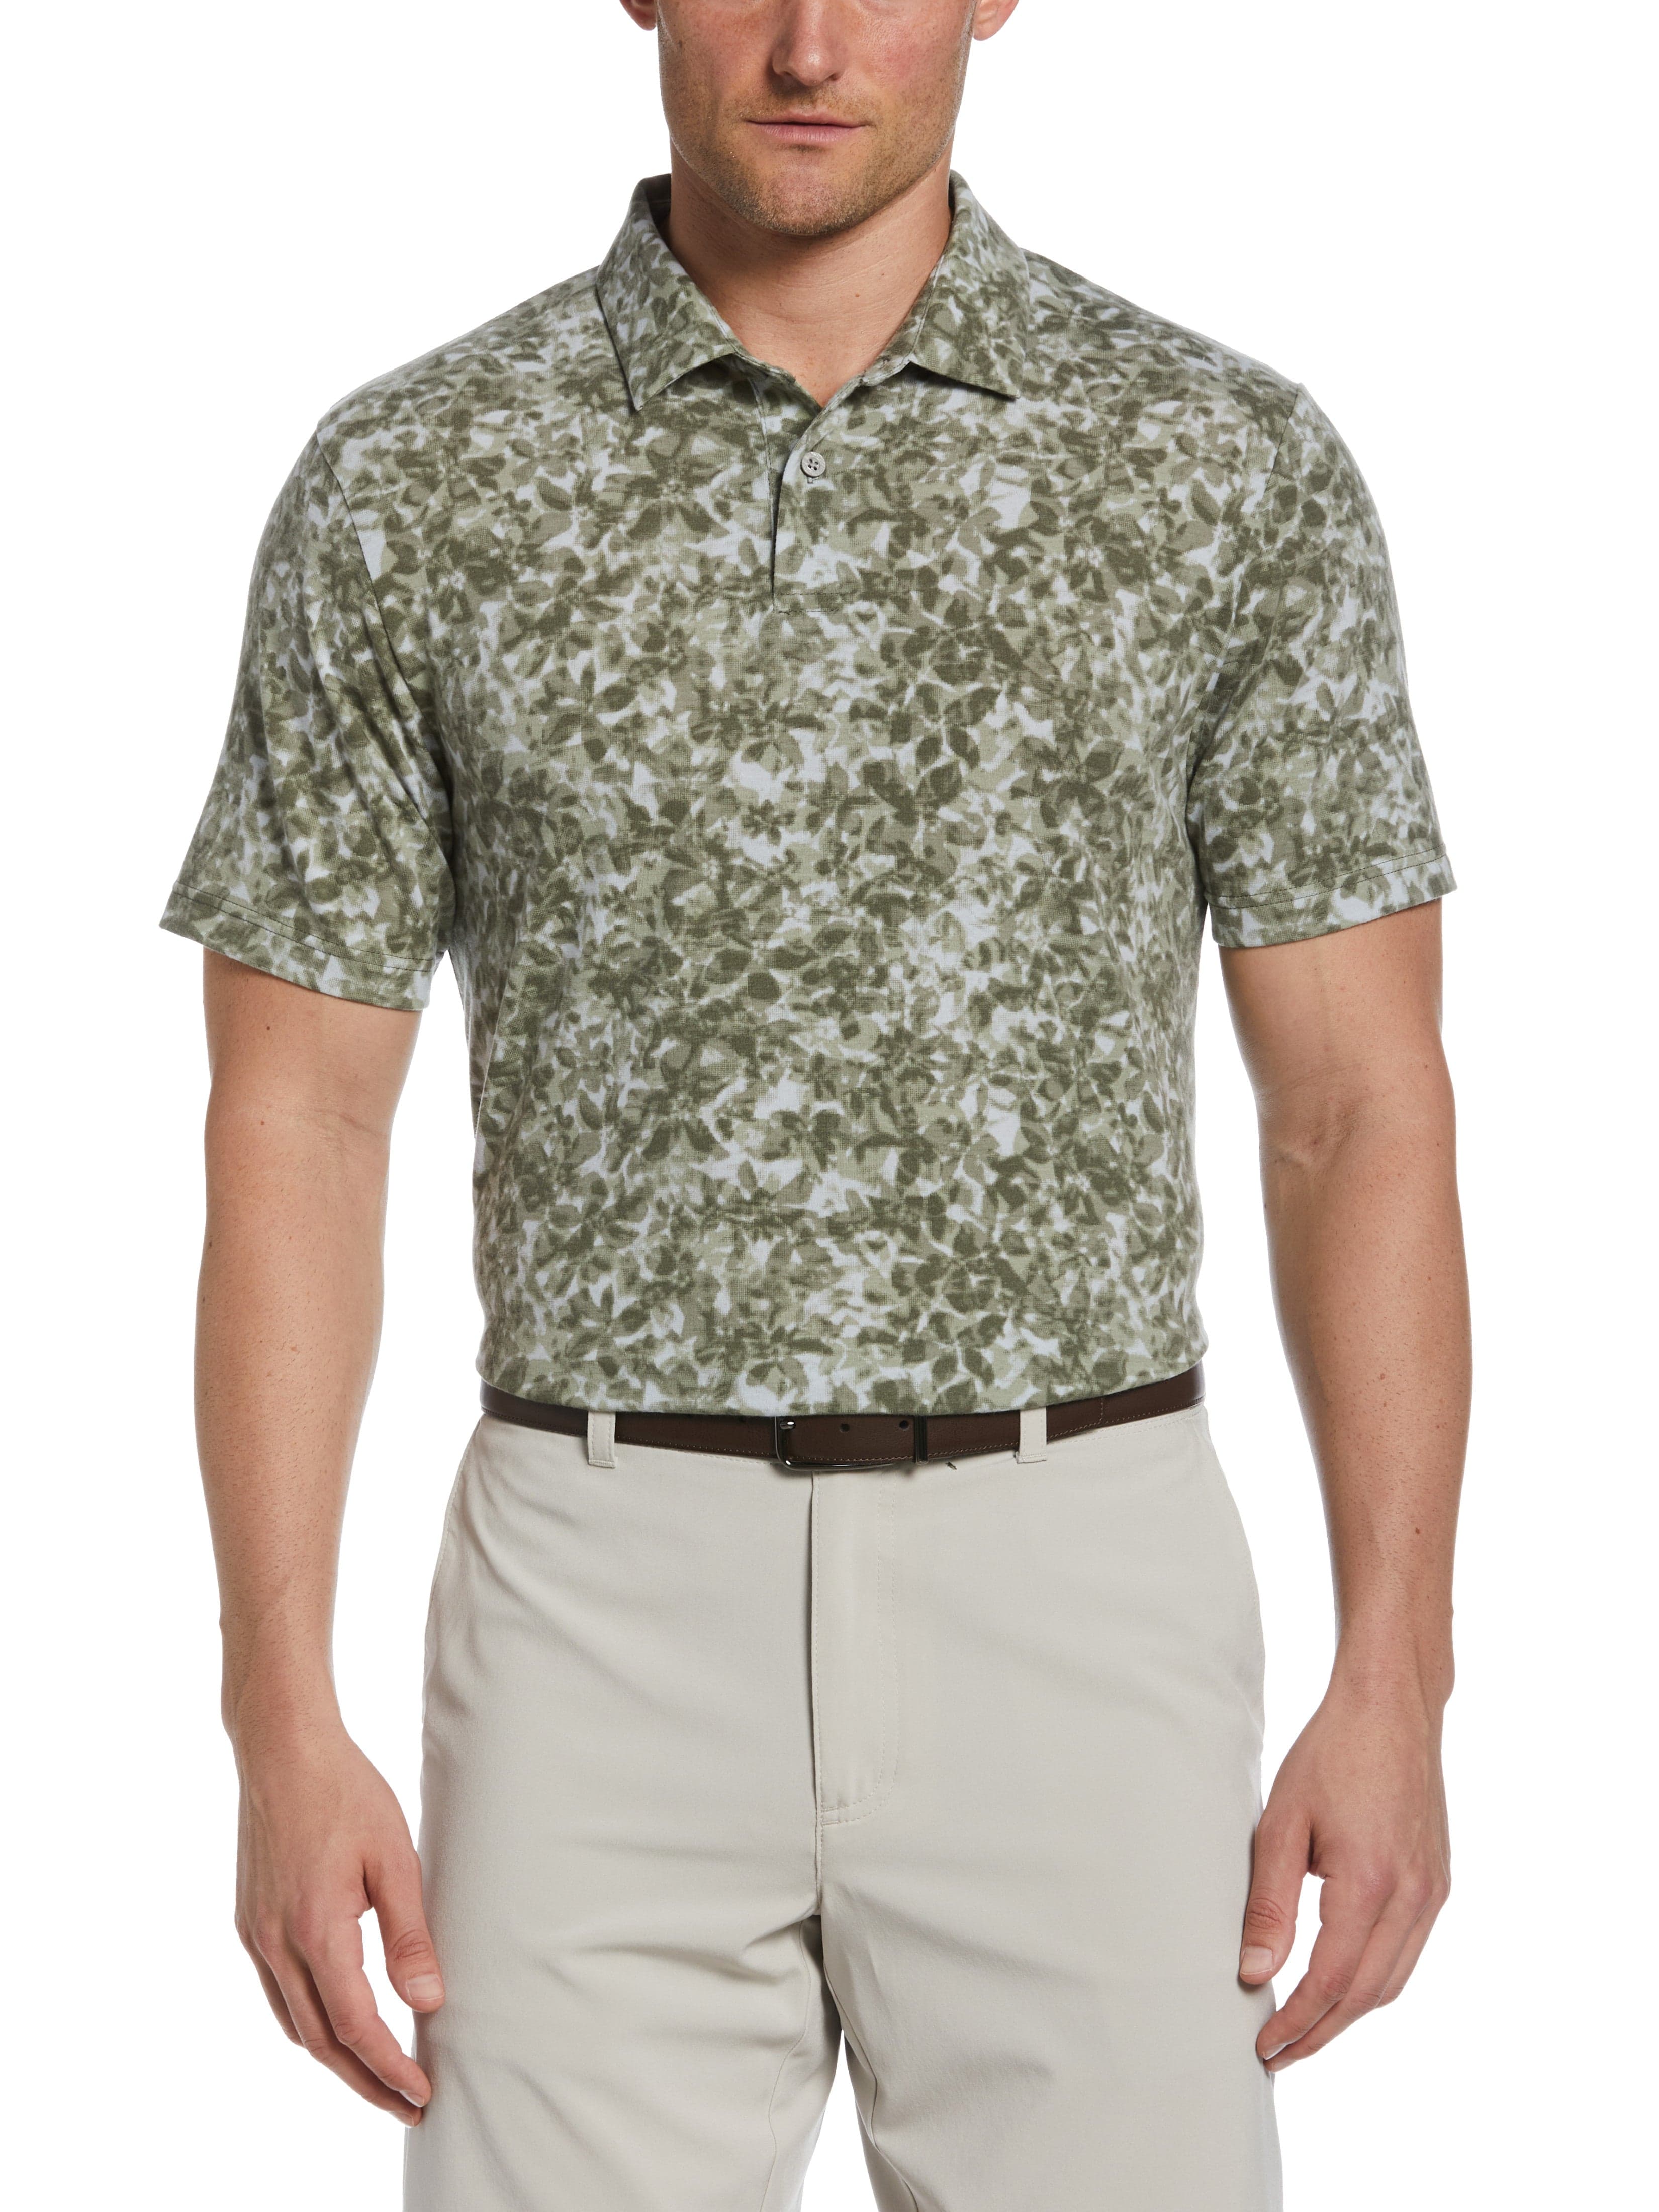 PGA TOUR Apparel Mens Distorted Floral Camo Print Golf Polo Shirt, Size Small, Industrial Green, Polyester/Recycled Polyester/Cotton